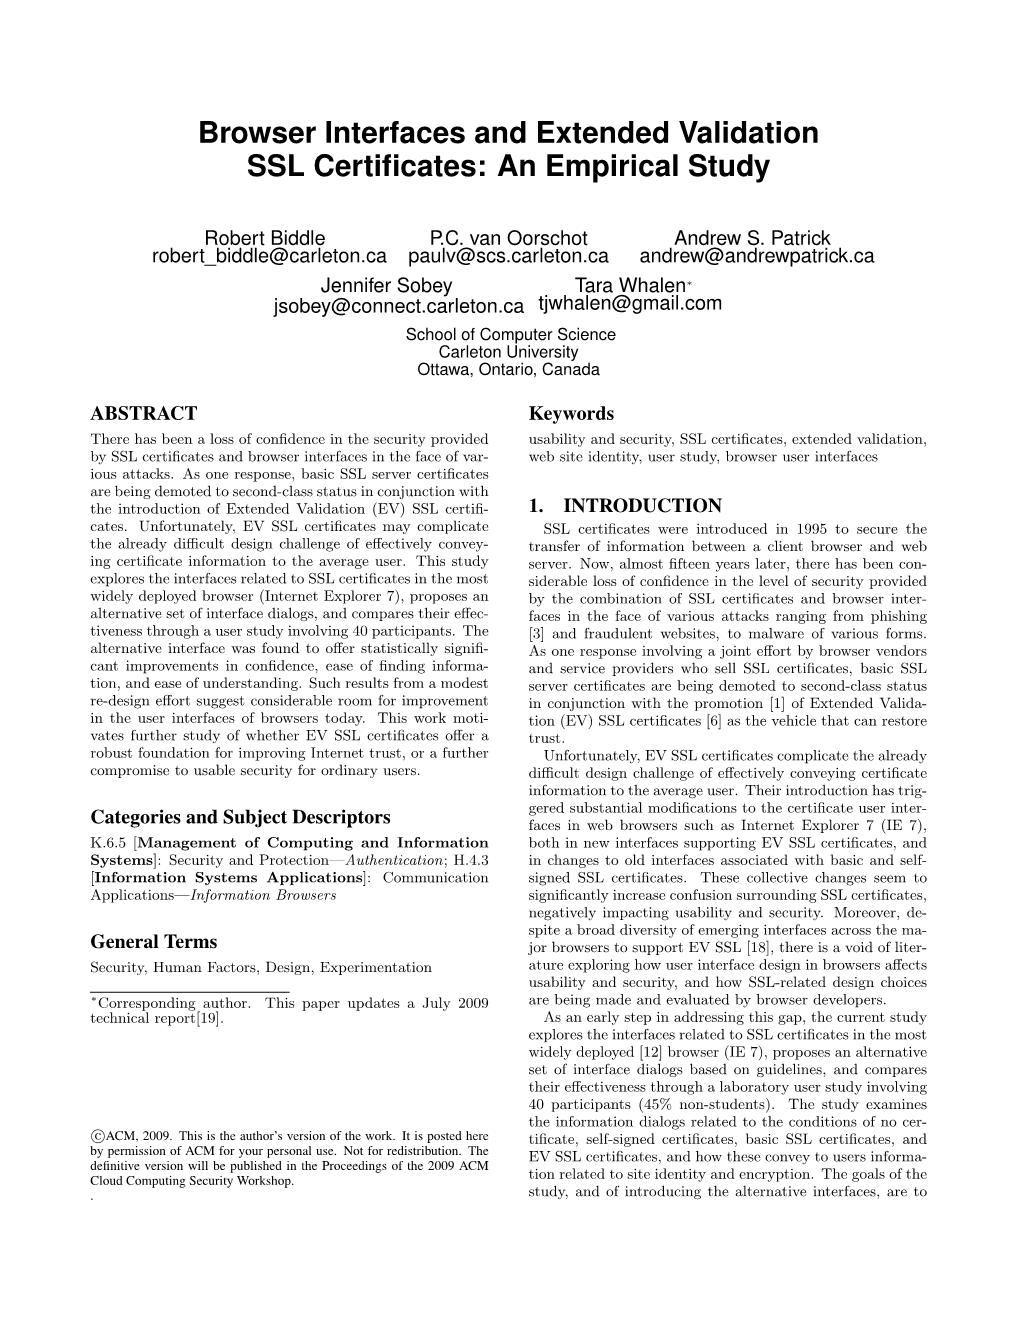 Browser Interfaces and Extended Validation SSL Certificates: an Empirical Study